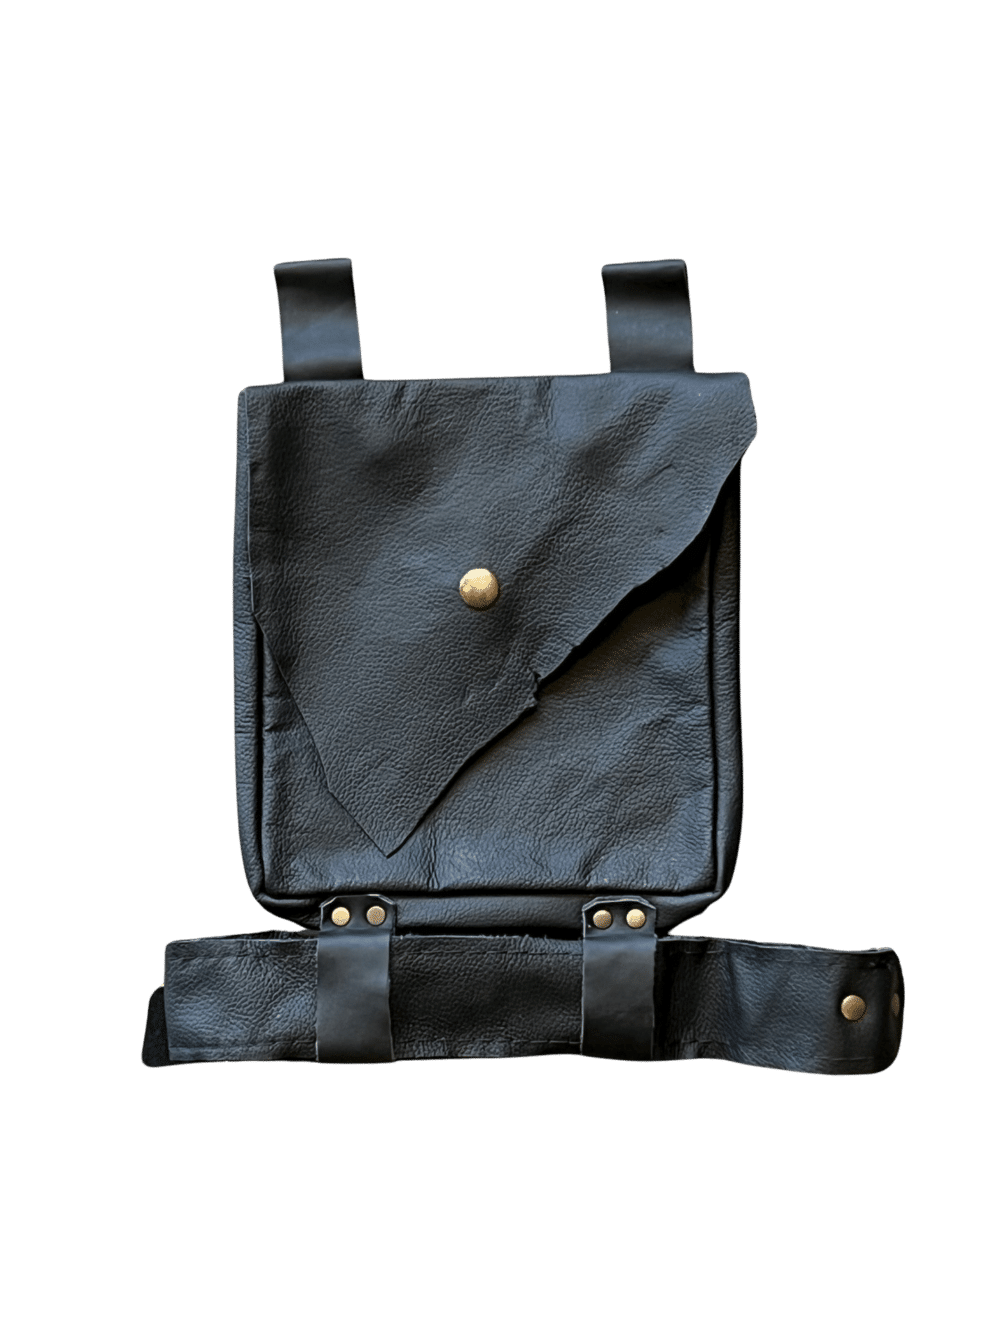 A Leather Unisex Thigh Bag that slides onto a belt, and then wraps around the leg for support. One big pocket to hold all of your daily essentials.